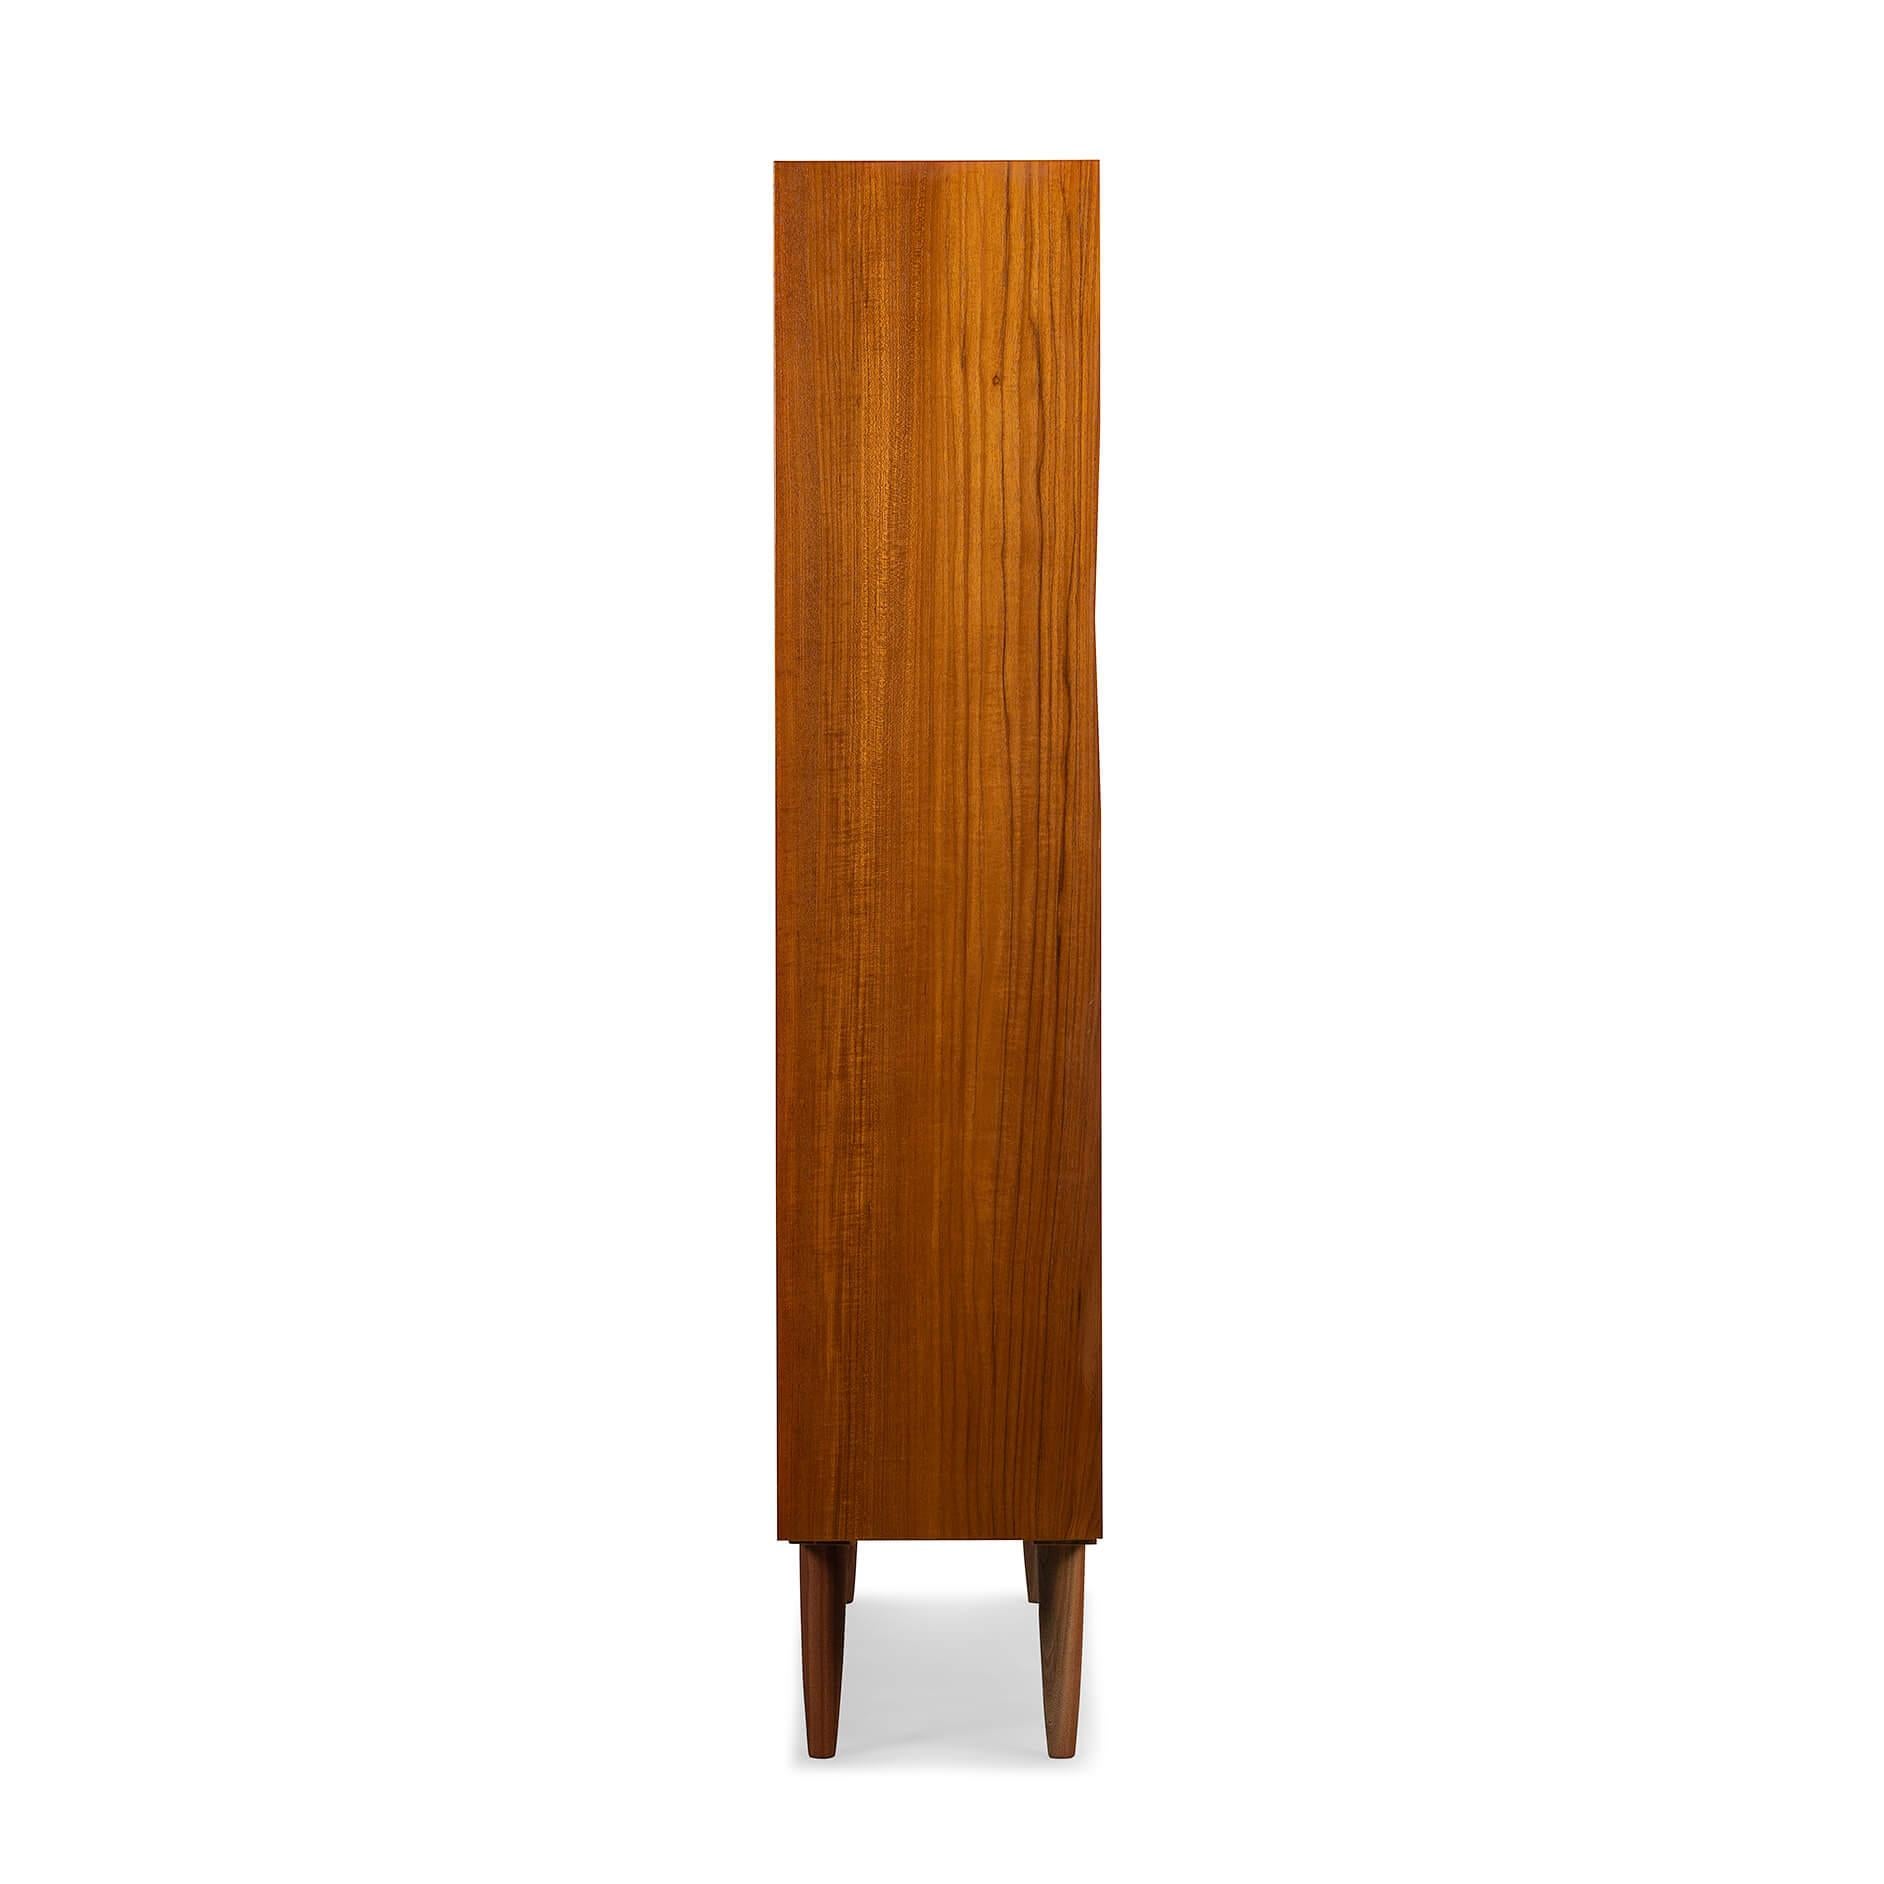 Danish big bookcase in beautiful teak veneer. Design by Carlo Jensen and made by Hundevad & Co. 

This bookcase is in very good vintage condition and has a total of 8 height-adjustable shelves.